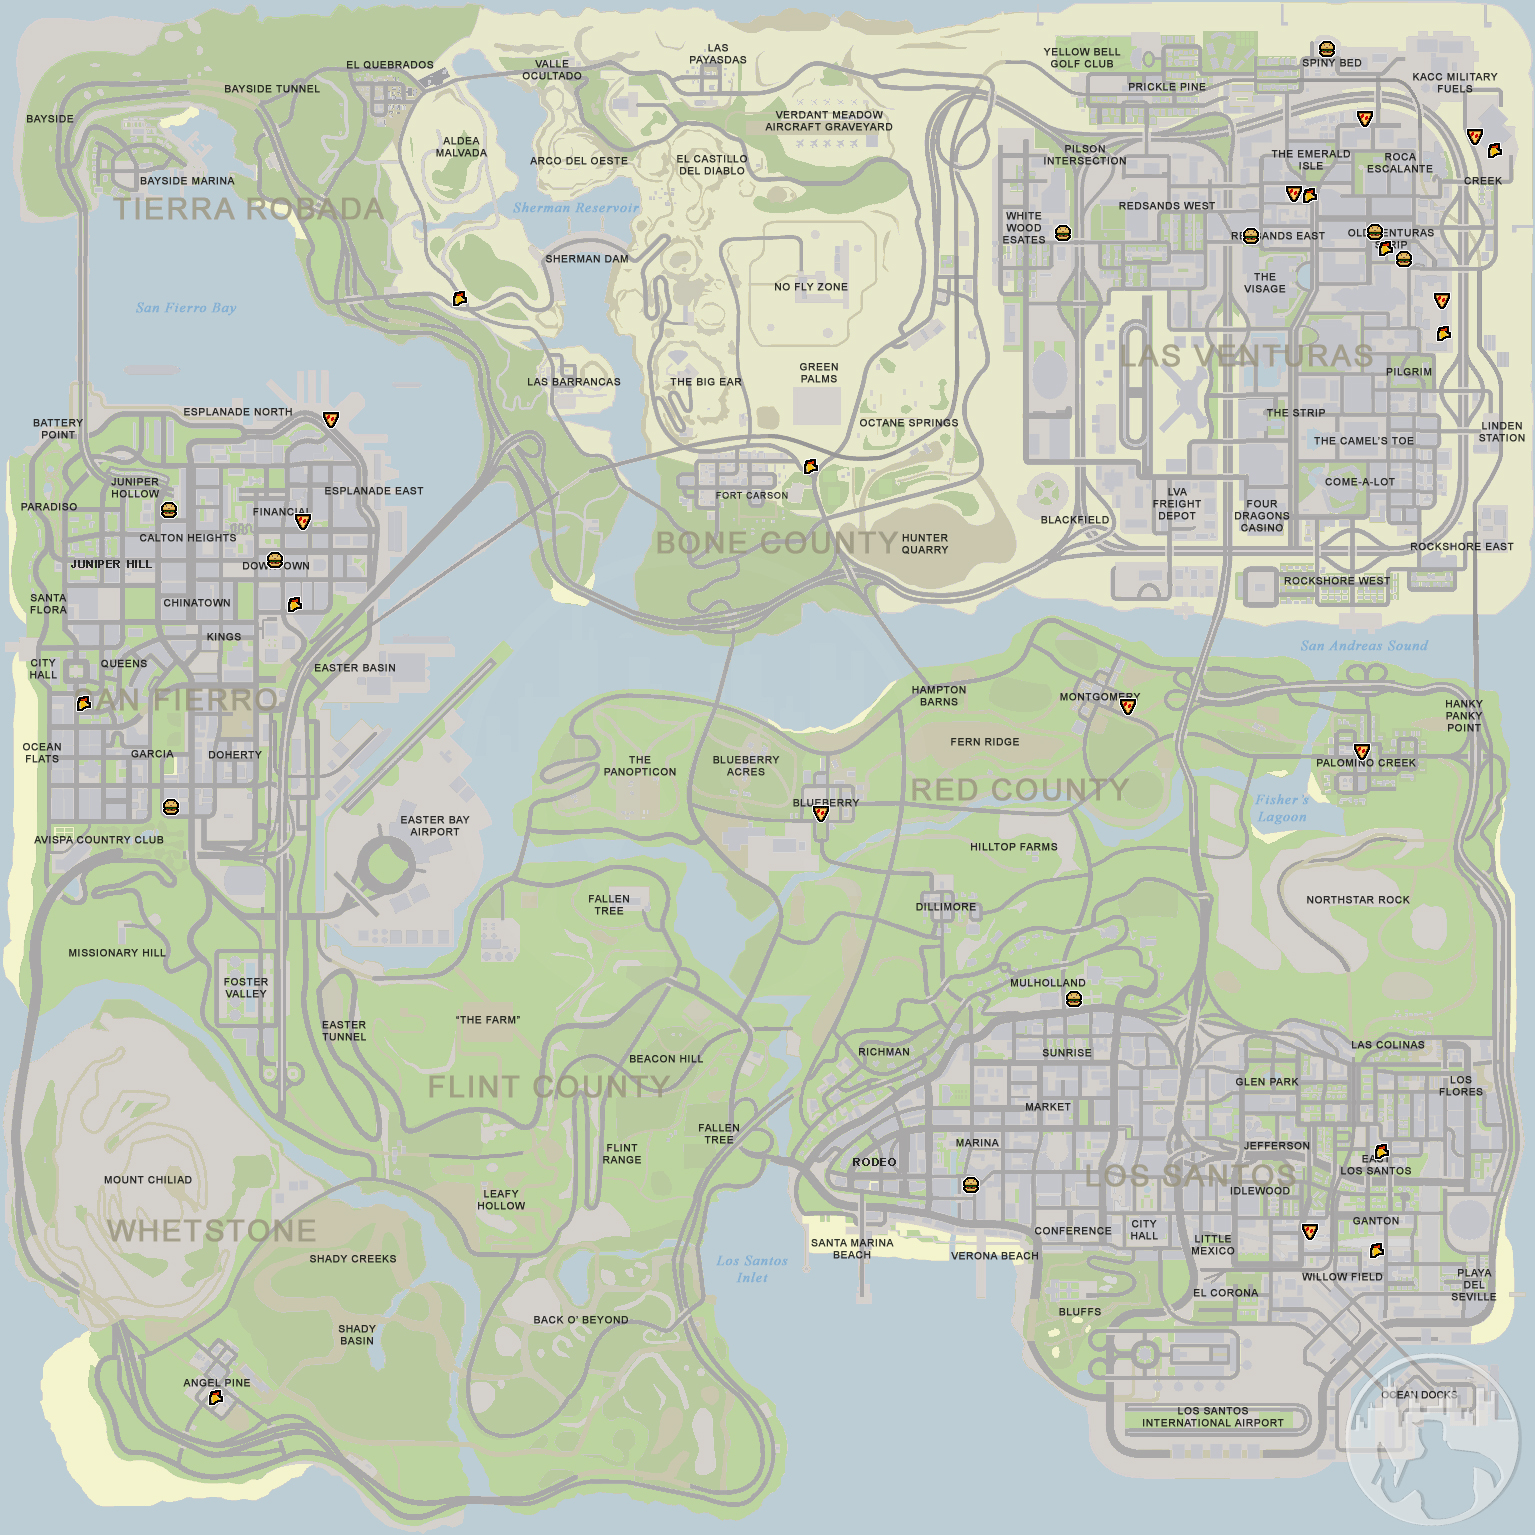 Road map of GTA San Andreas | Games | Mapsland | Maps of the World